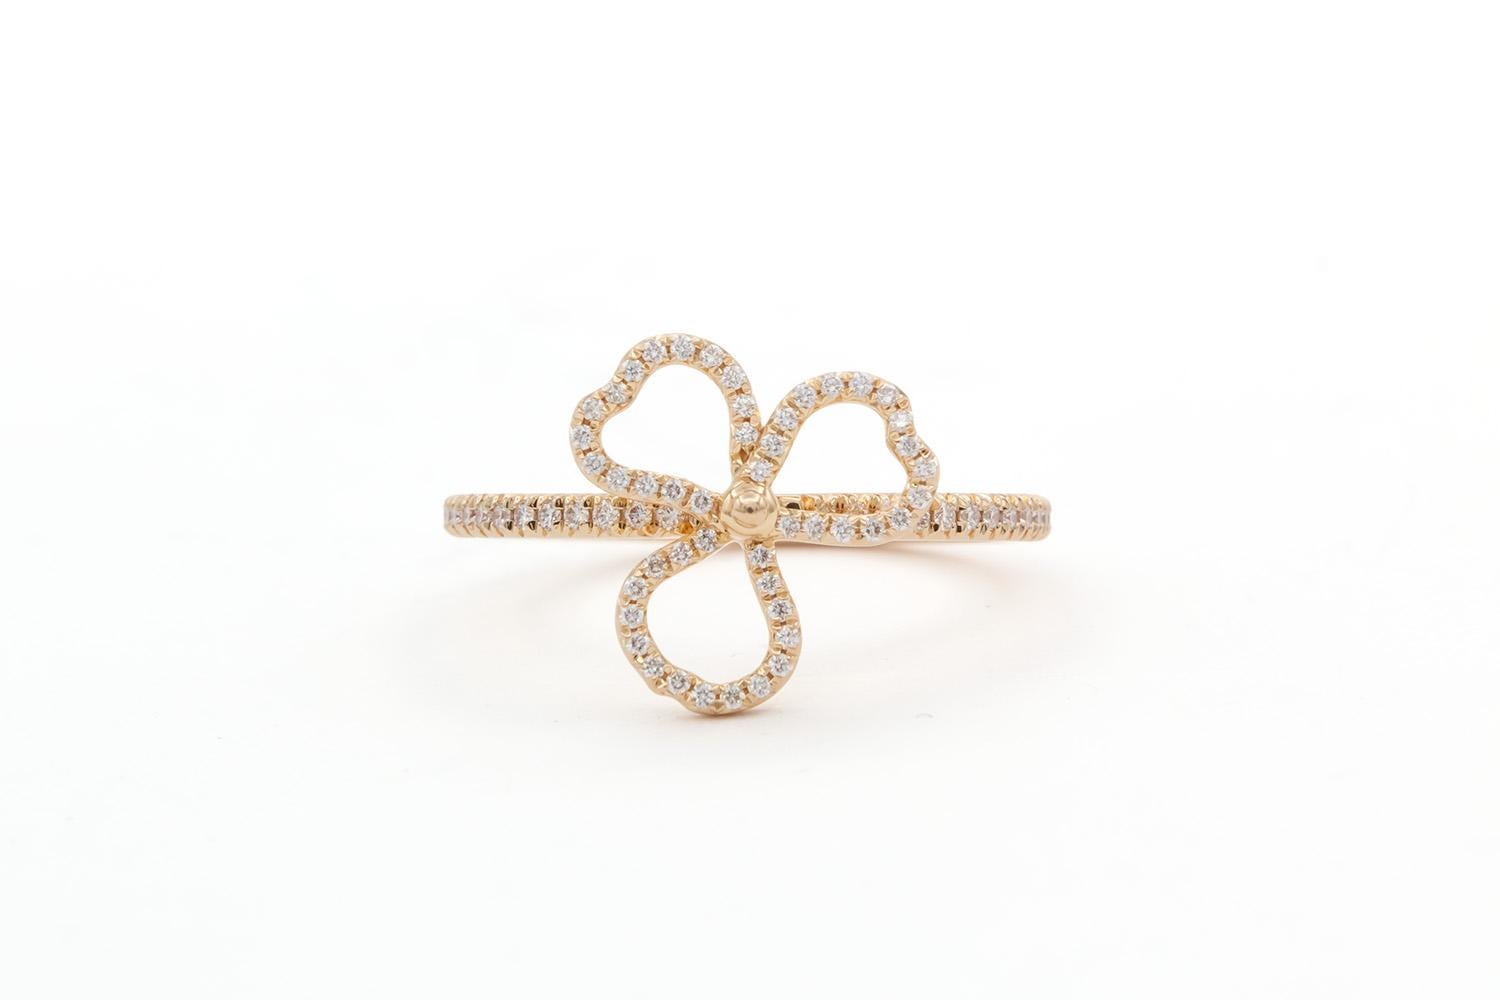 We are pleased to offer this Authentic Tiffany & Co. 18k Rose Gold & Diamond Open Paper Flower Ring. This beautiful ring features the Tiffany & Co 